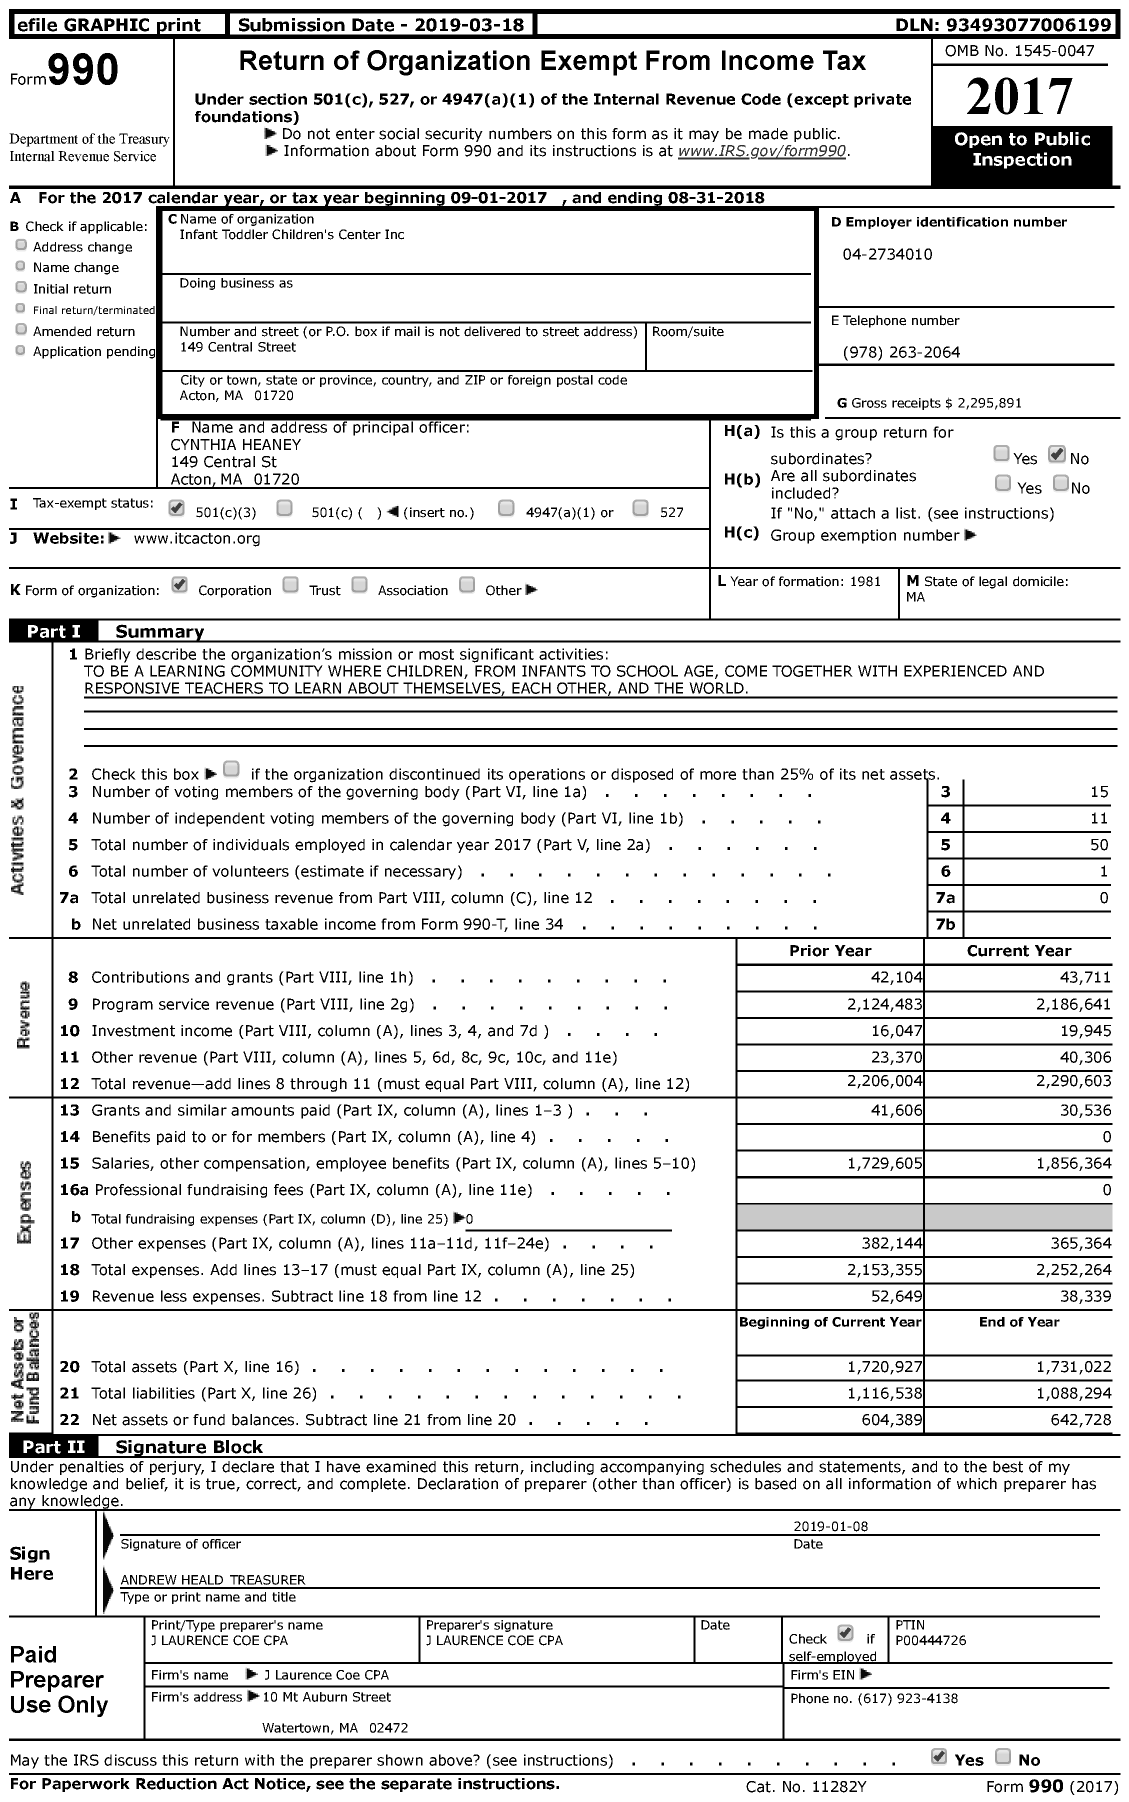 Image of first page of 2017 Form 990 for Infant Toddler Children's Center (ITC)